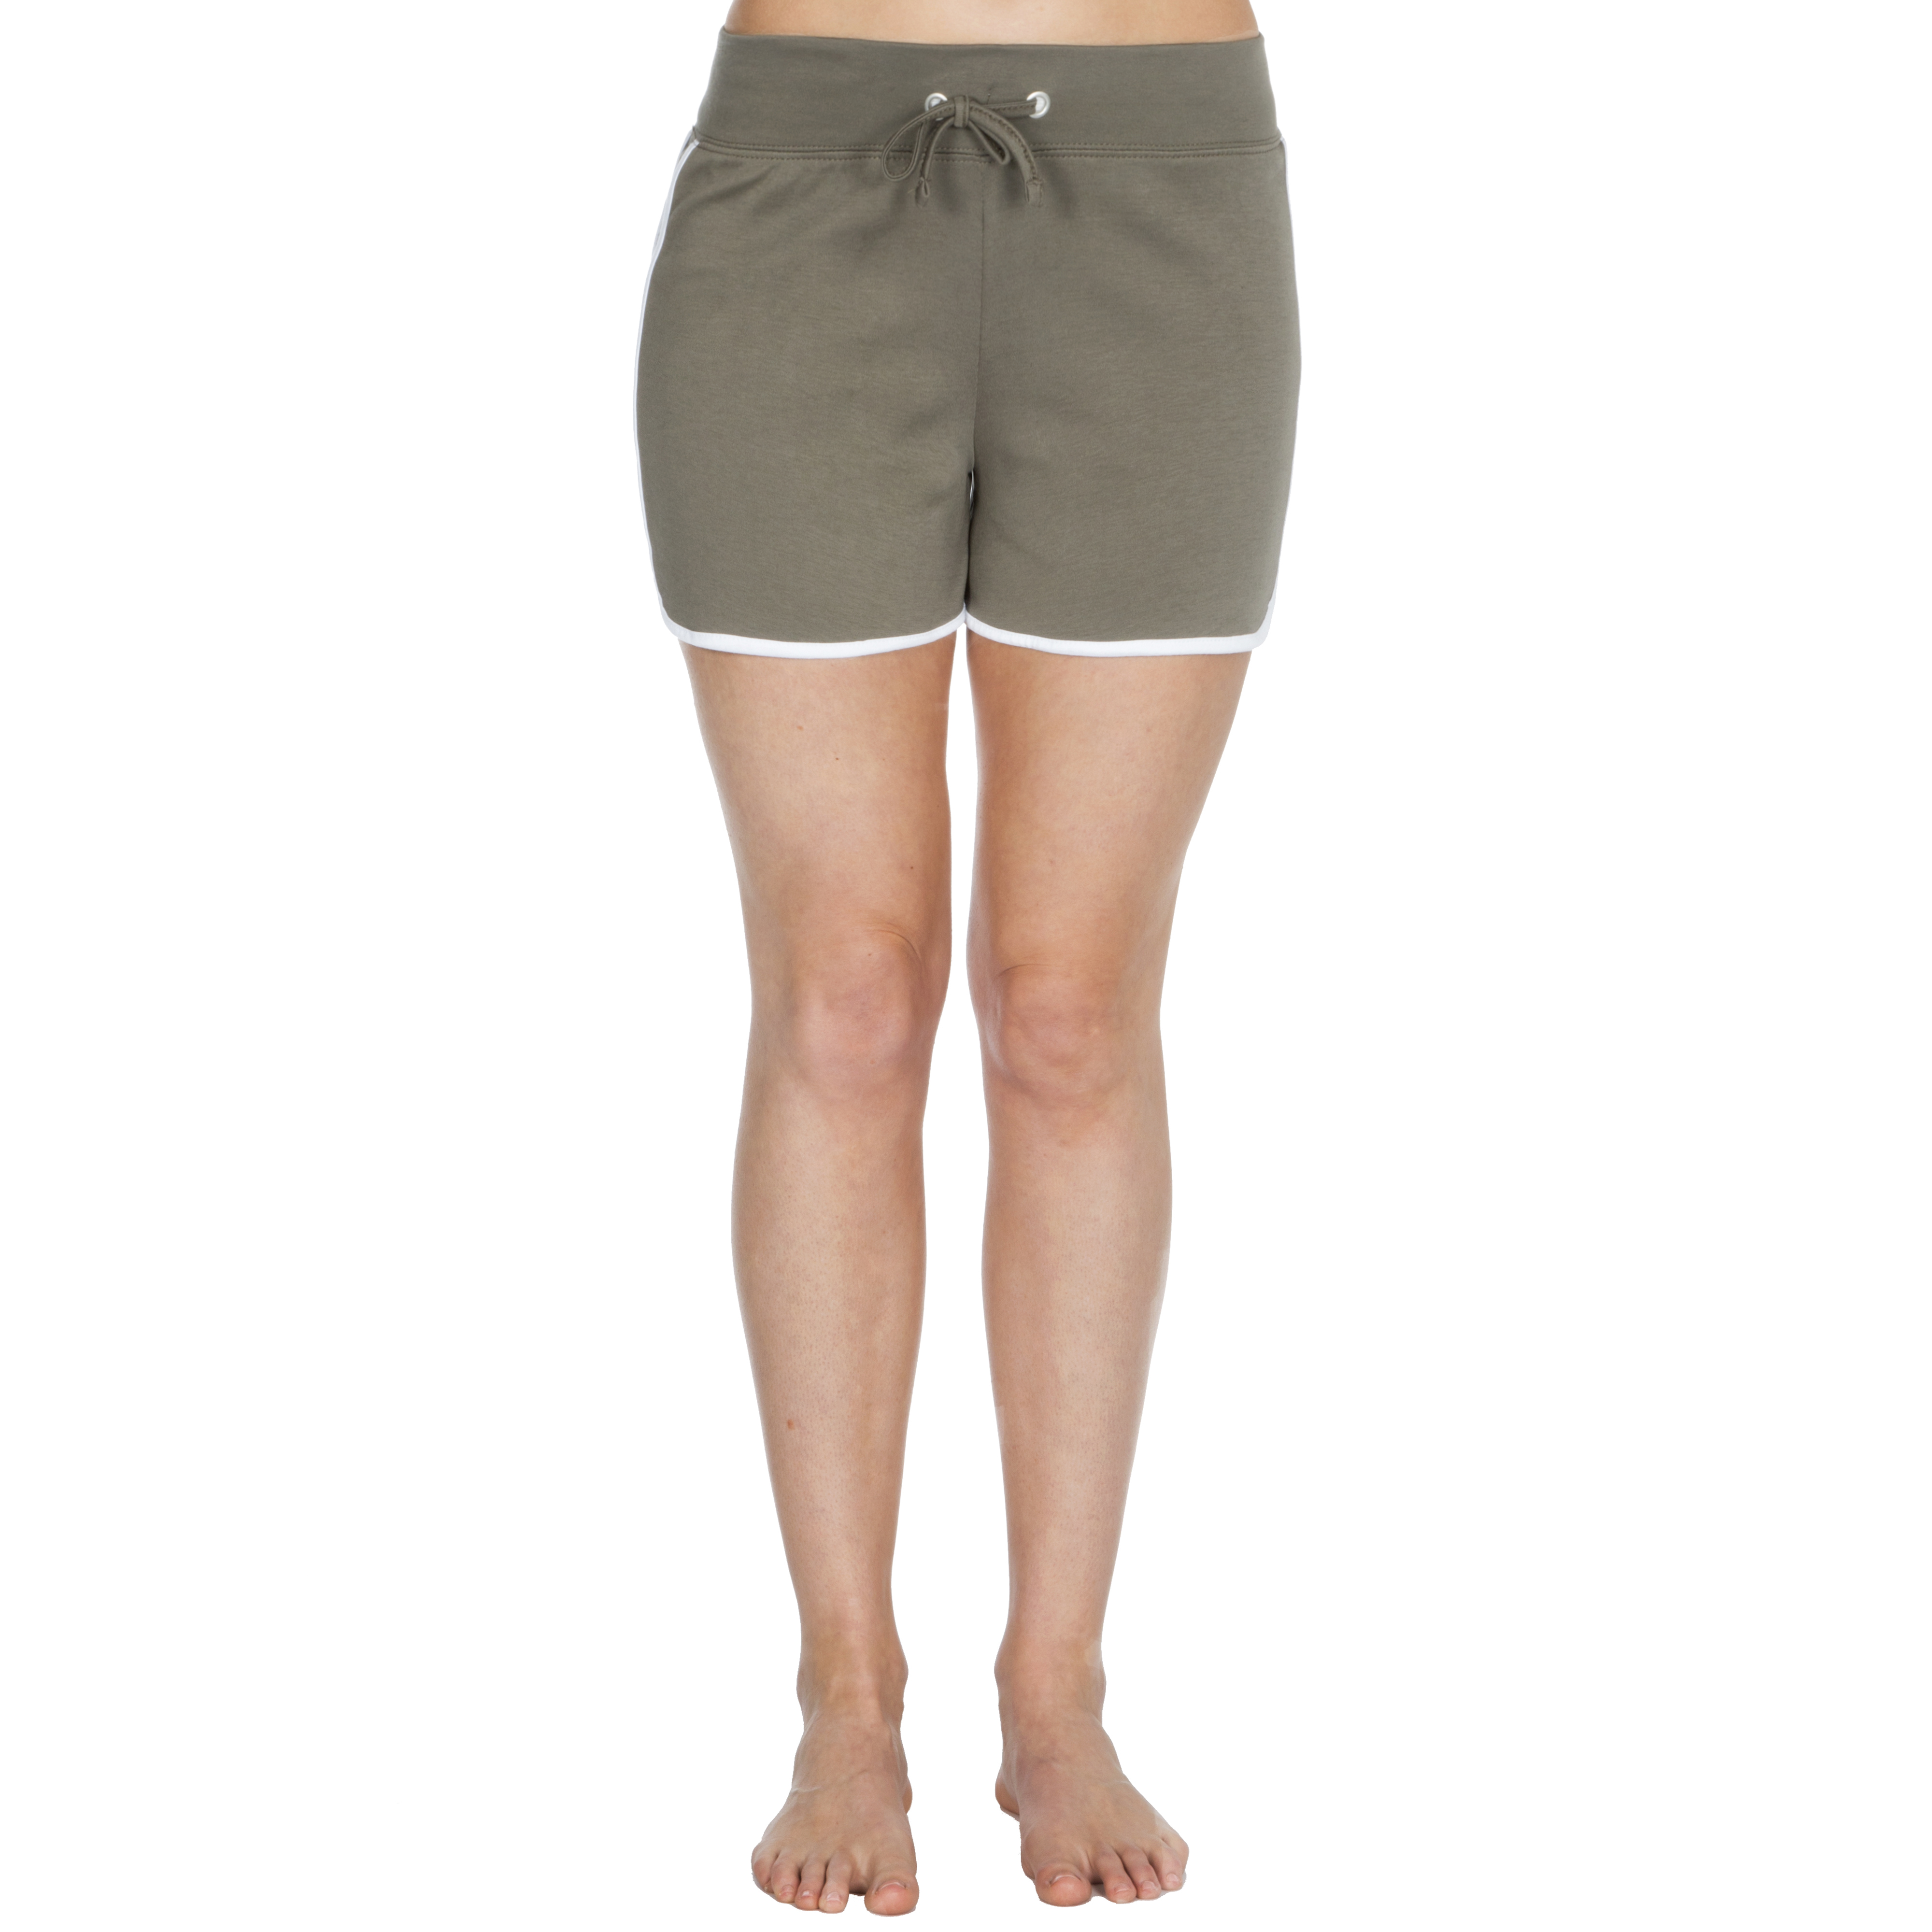 Buy online Printed Hot Pants Short from Skirts & Shorts for Women by Quinoa  for ₹480 at 60% off